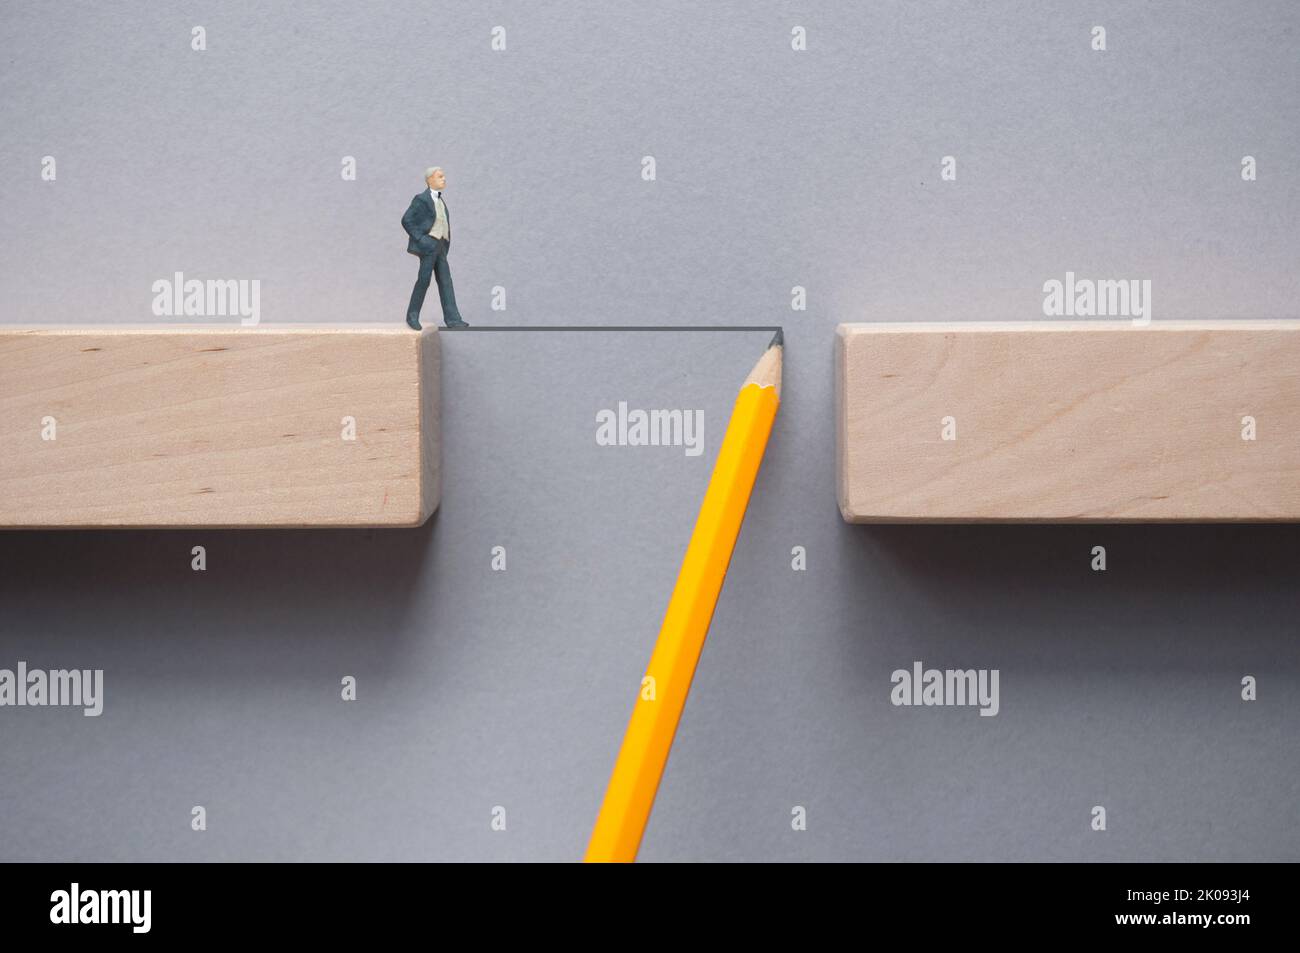 Miniature business man crossing a line sketched with a pencil bridging the gap between wooden blocks Stock Photo